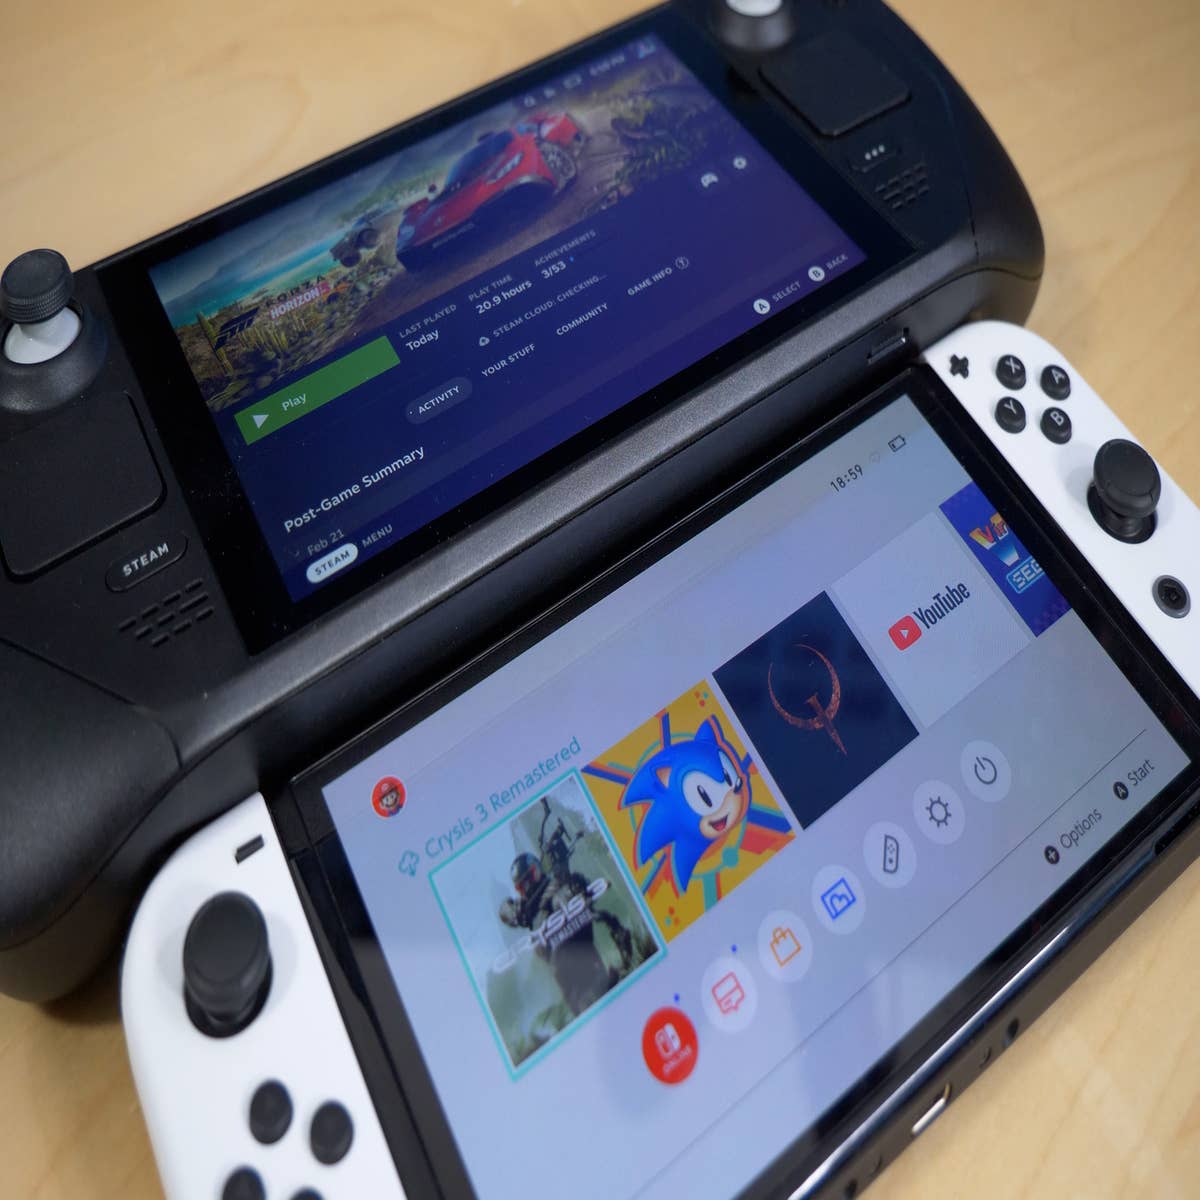 Steam Deck review: the handheld PC capable of console quality gaming